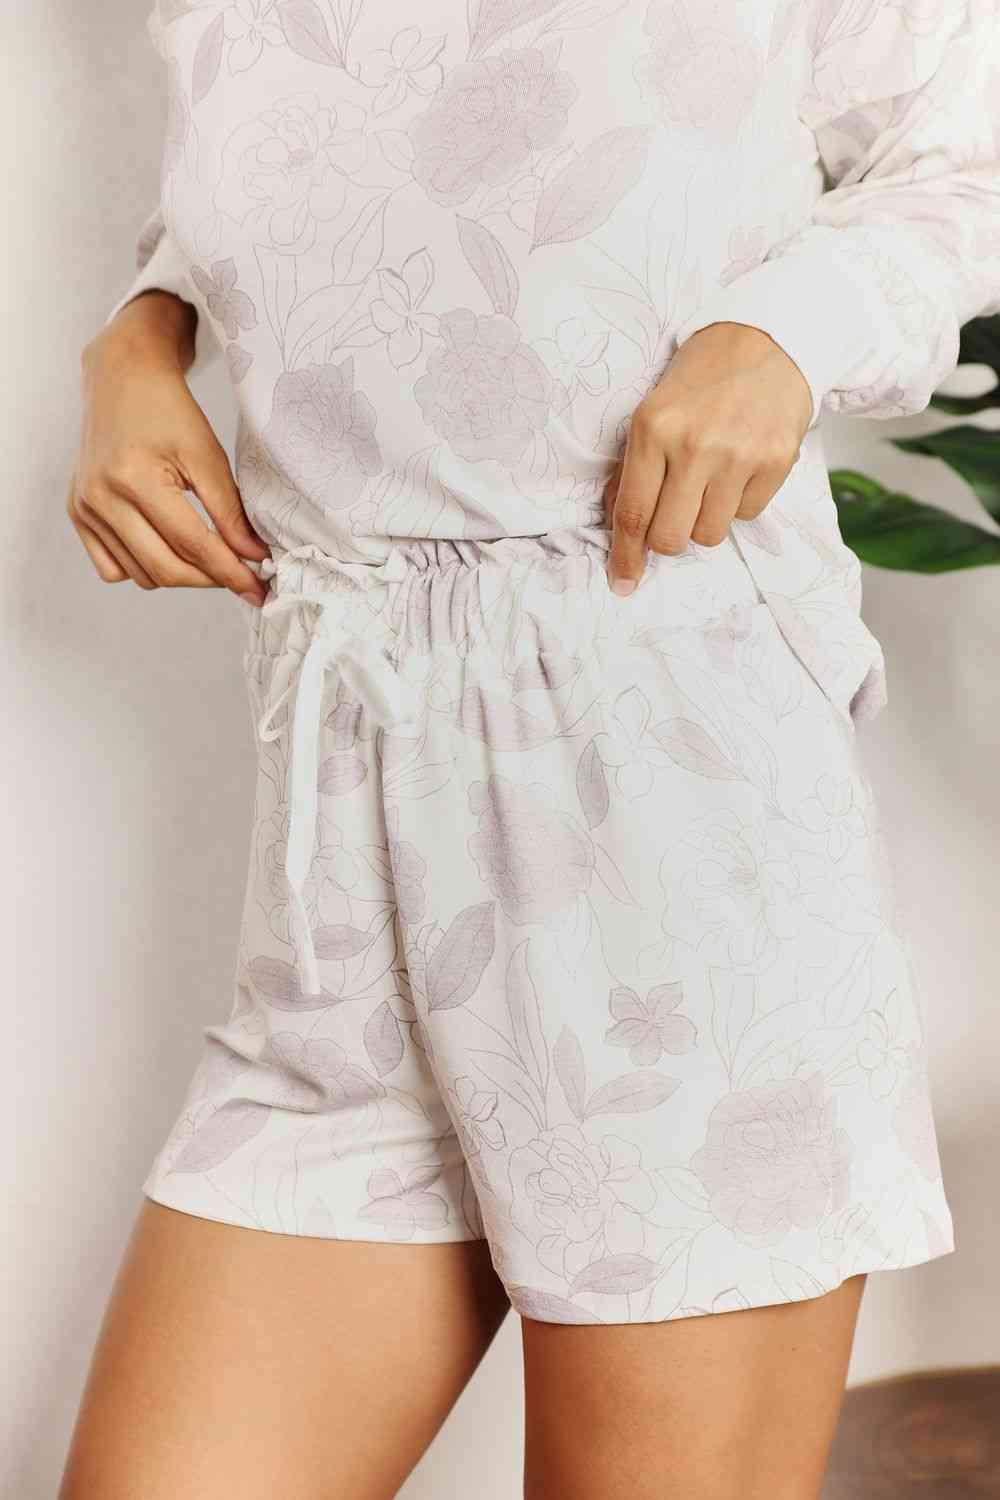 Double Take Floral Long Sleeve Top and Shorts Loungewear Set - Ash Boutique